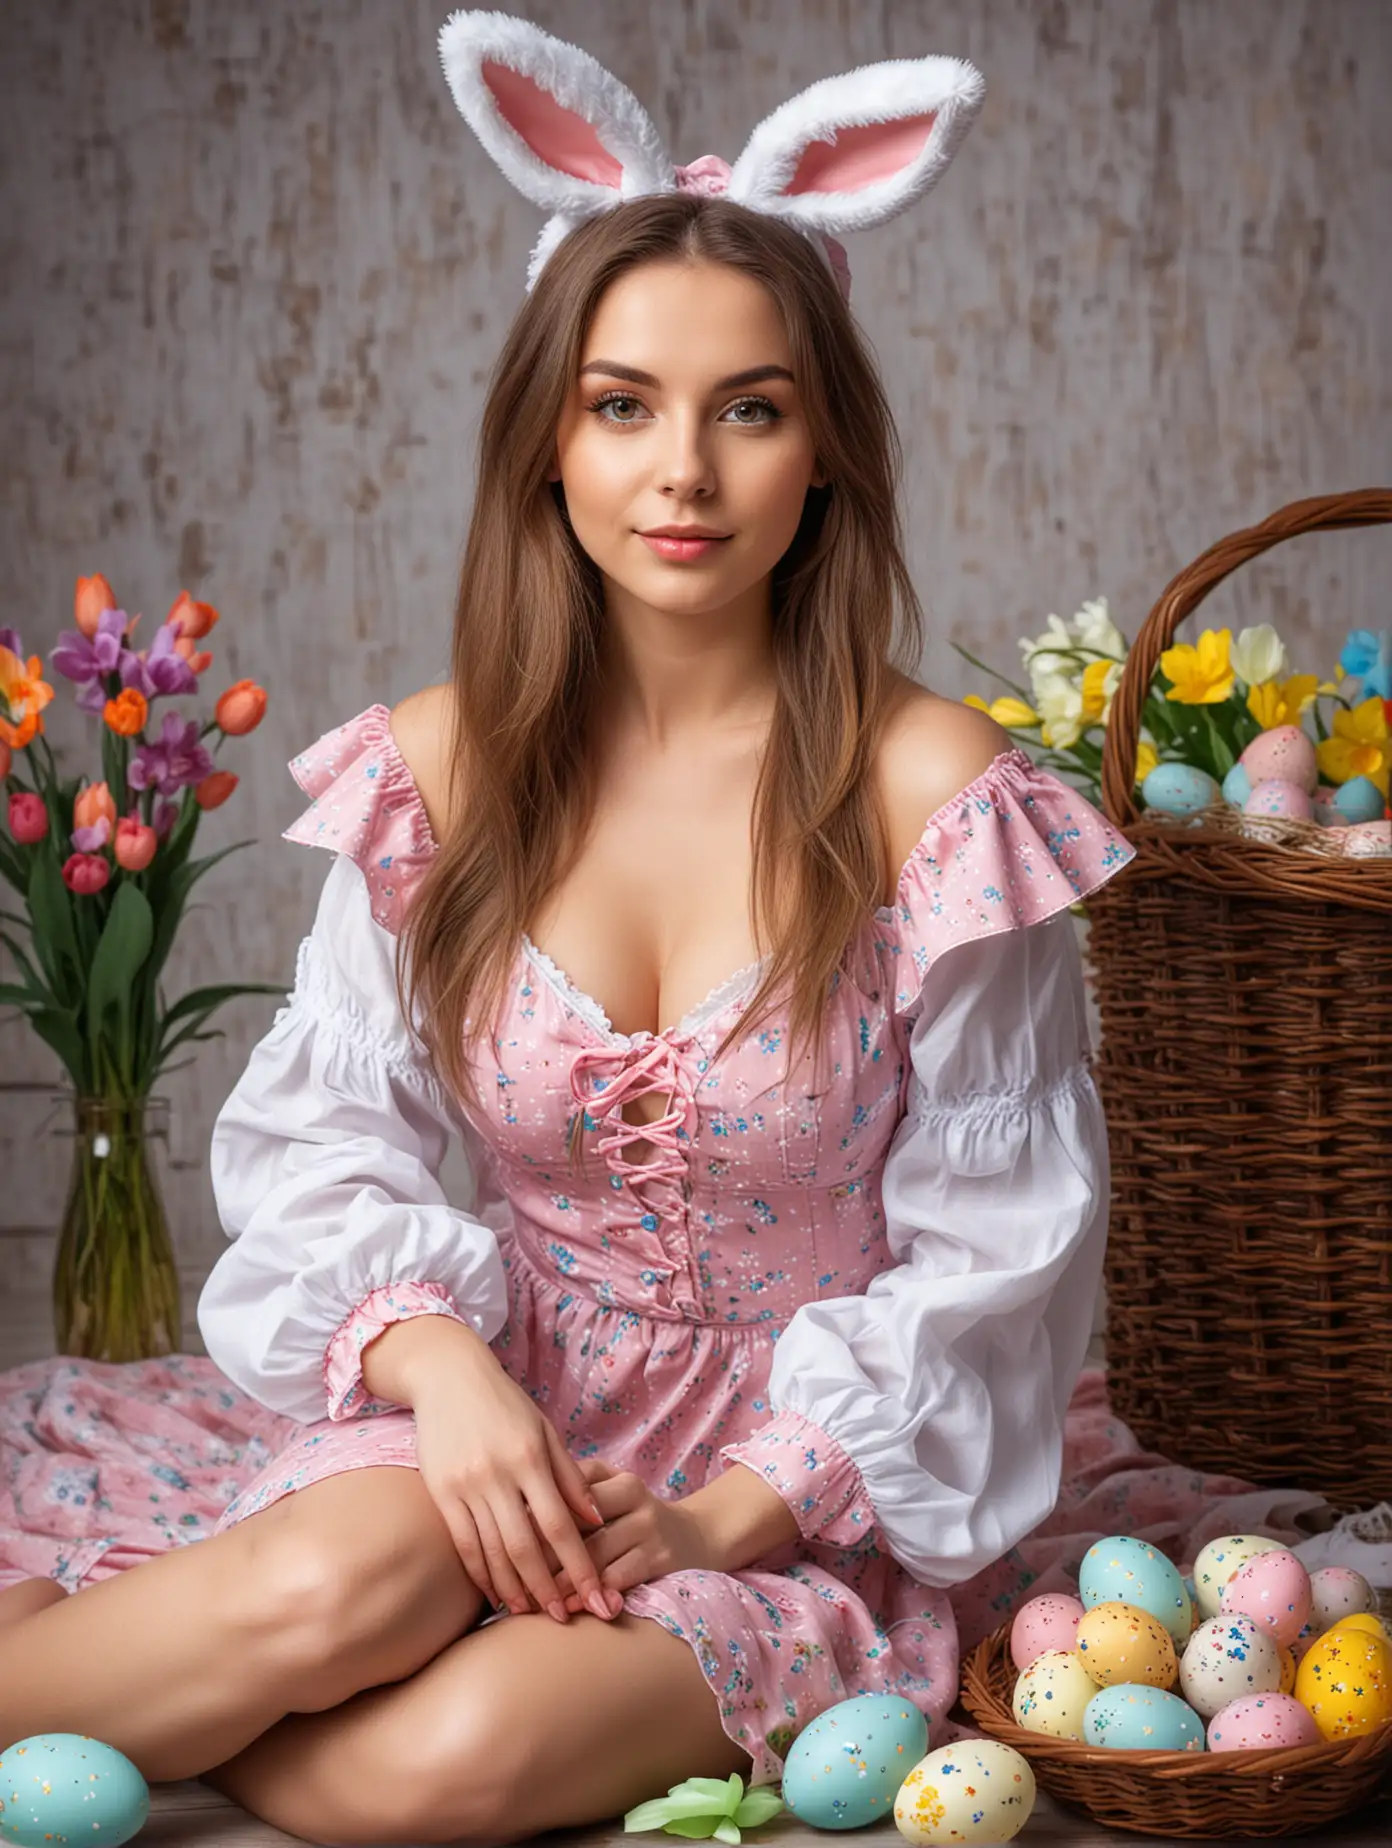 Easter-related theme photography, sexy Ukrainian girl, exquisite facial features, sexy Easter-themed clothes, in an Easter indoor scene, facing the camera, professional photography techniques, full body photo